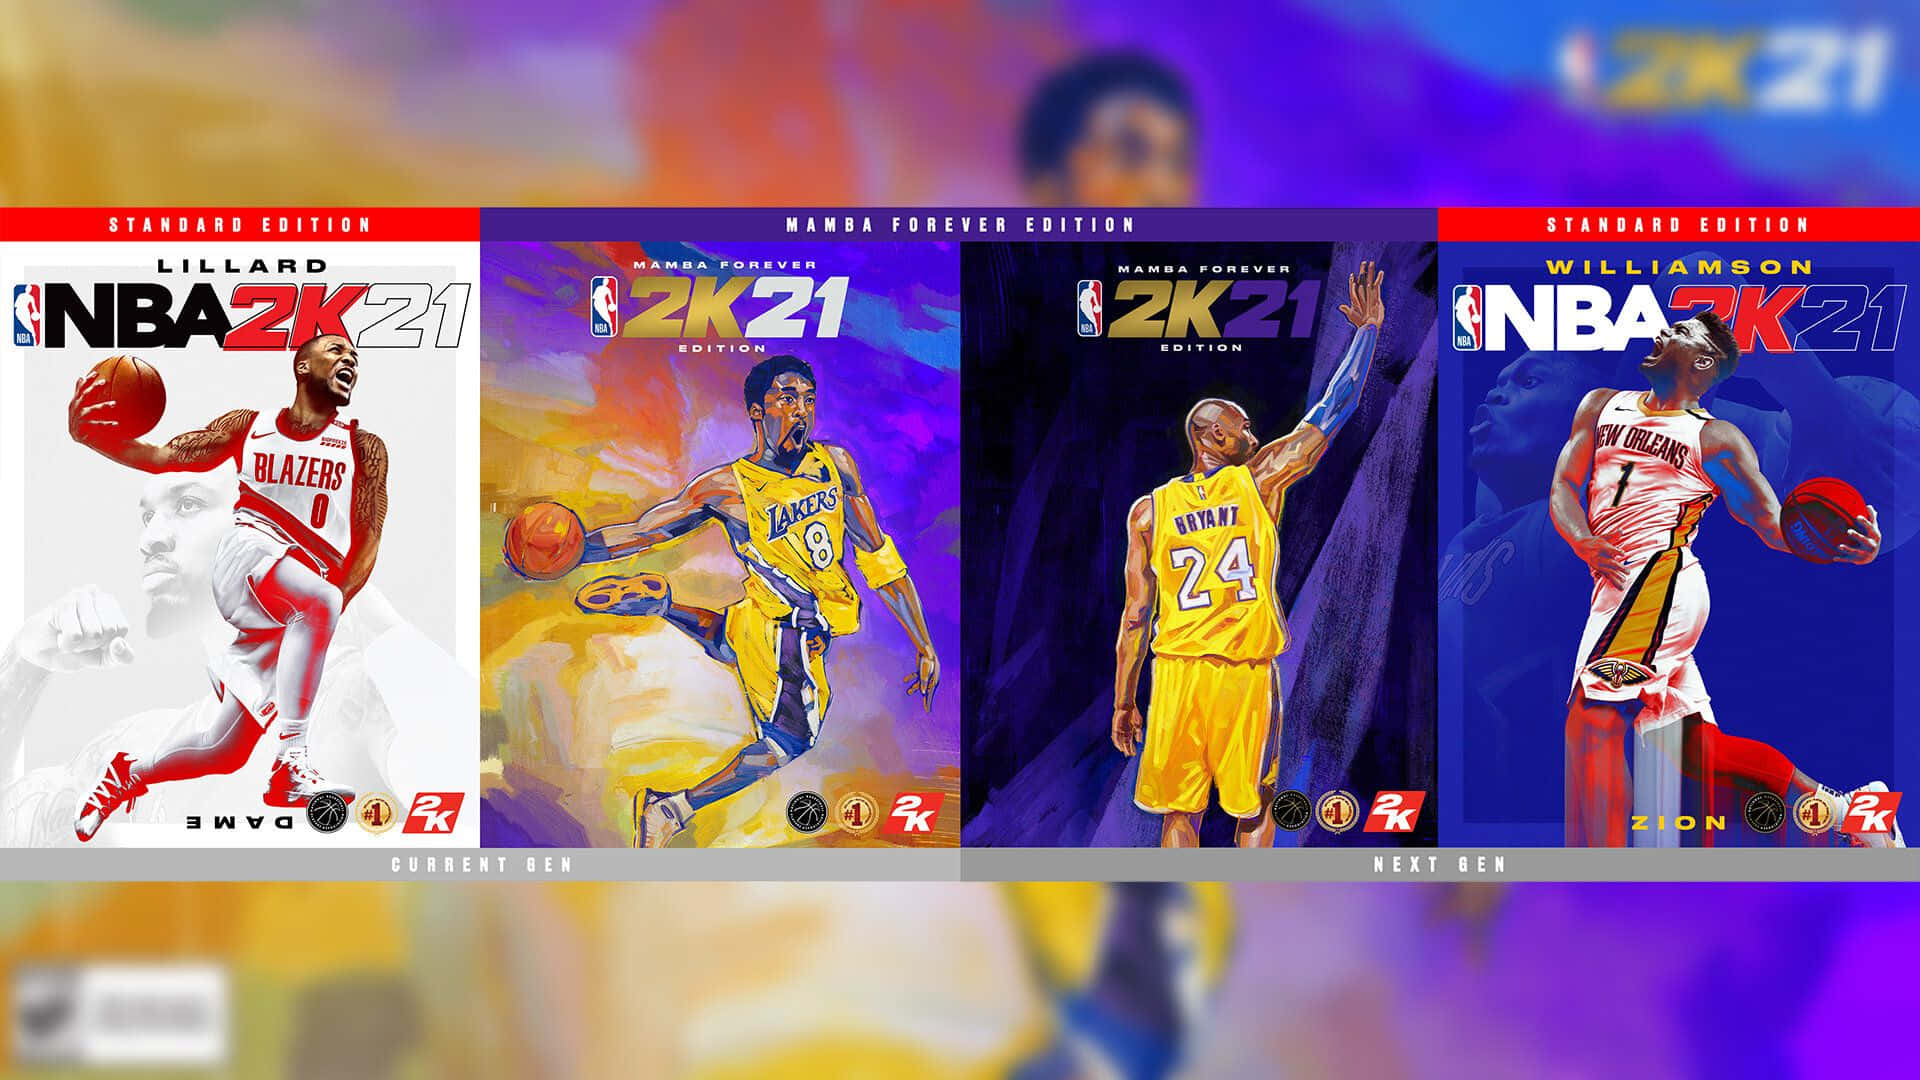 Nba2k21 Different Video Game Covers Wallpaper